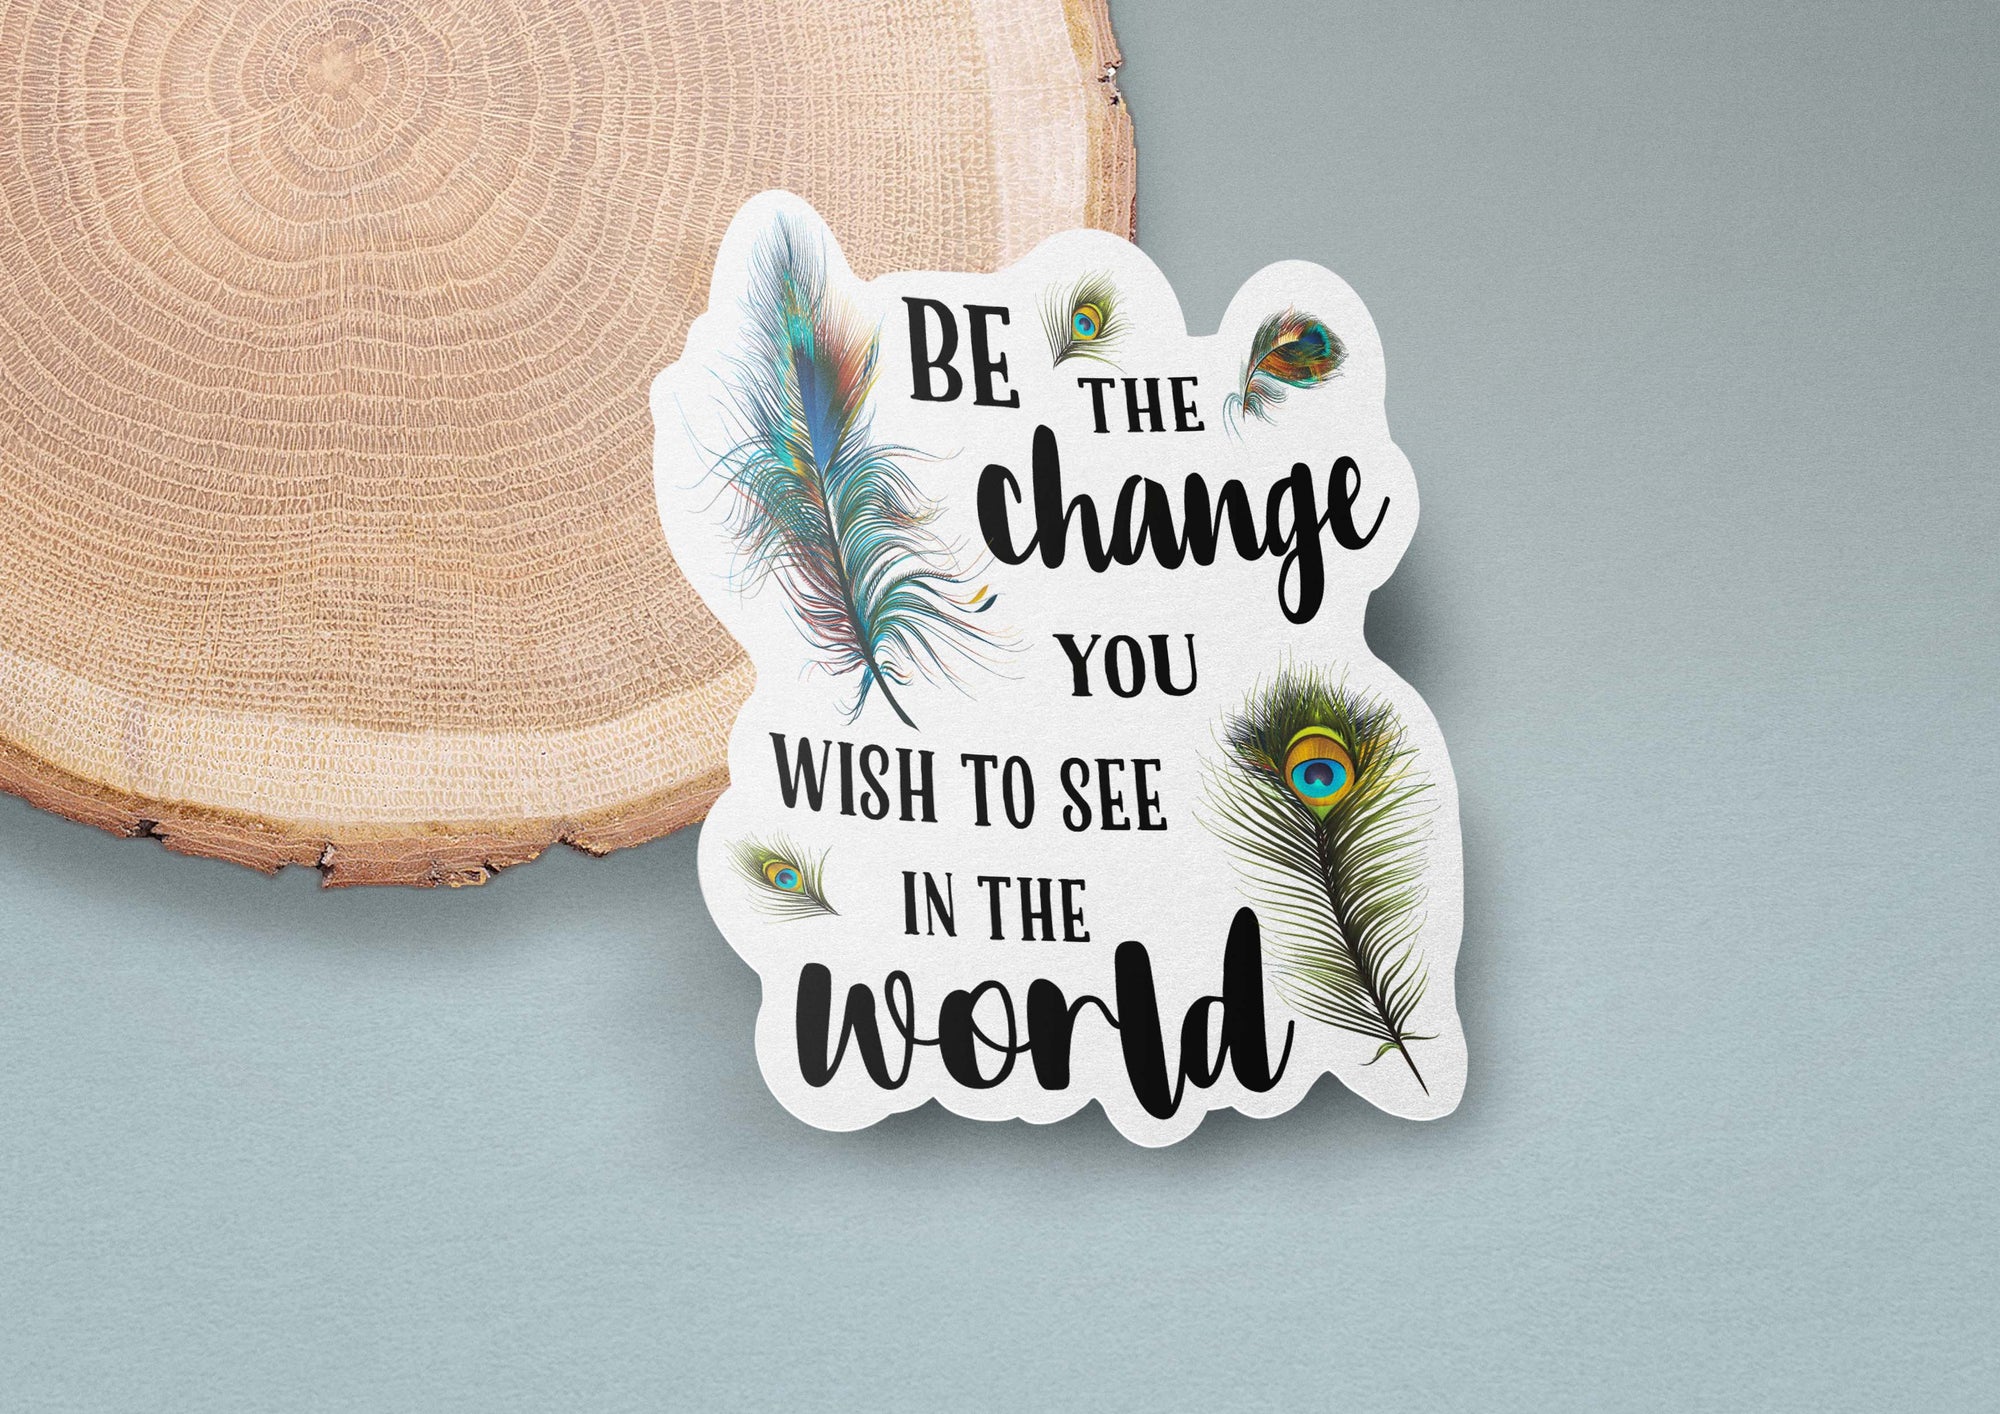 Be the Change You Wish to See in the World Sticker